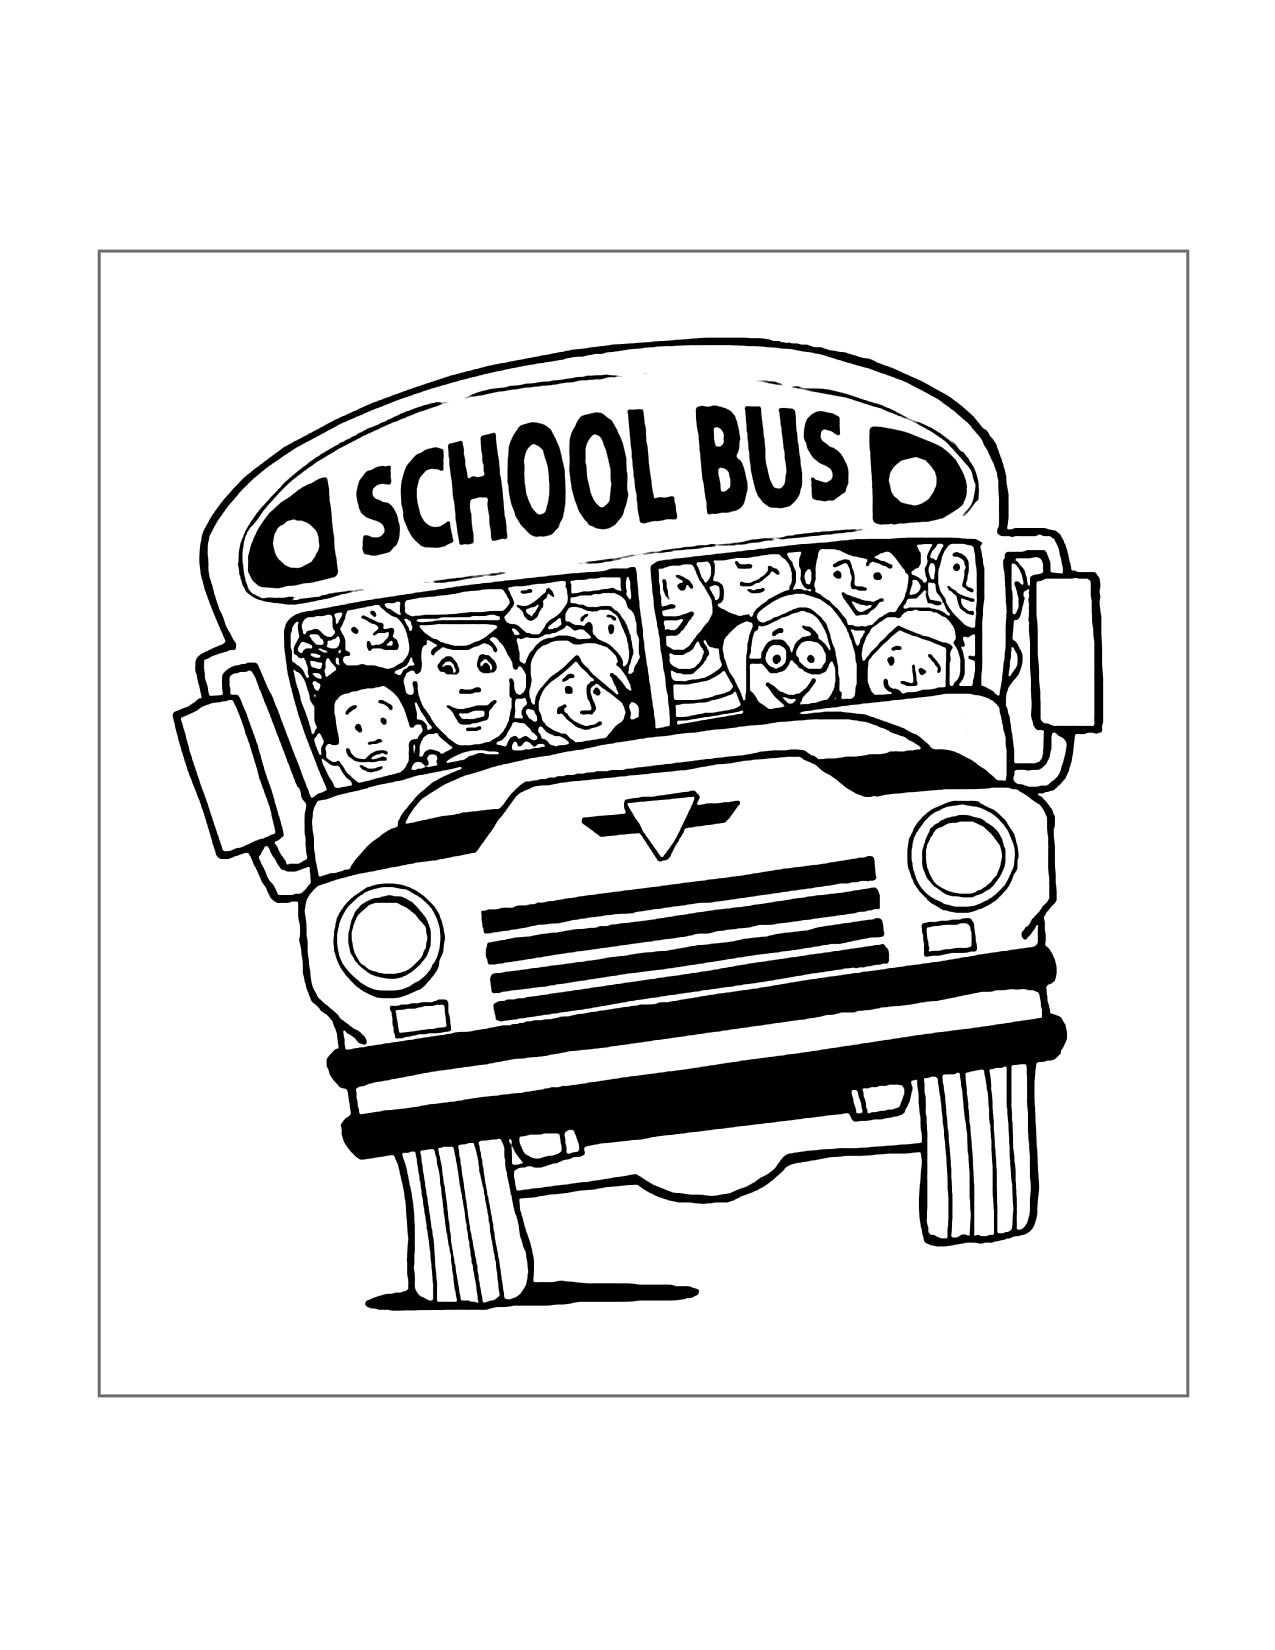 Full School Bus Coloring Page